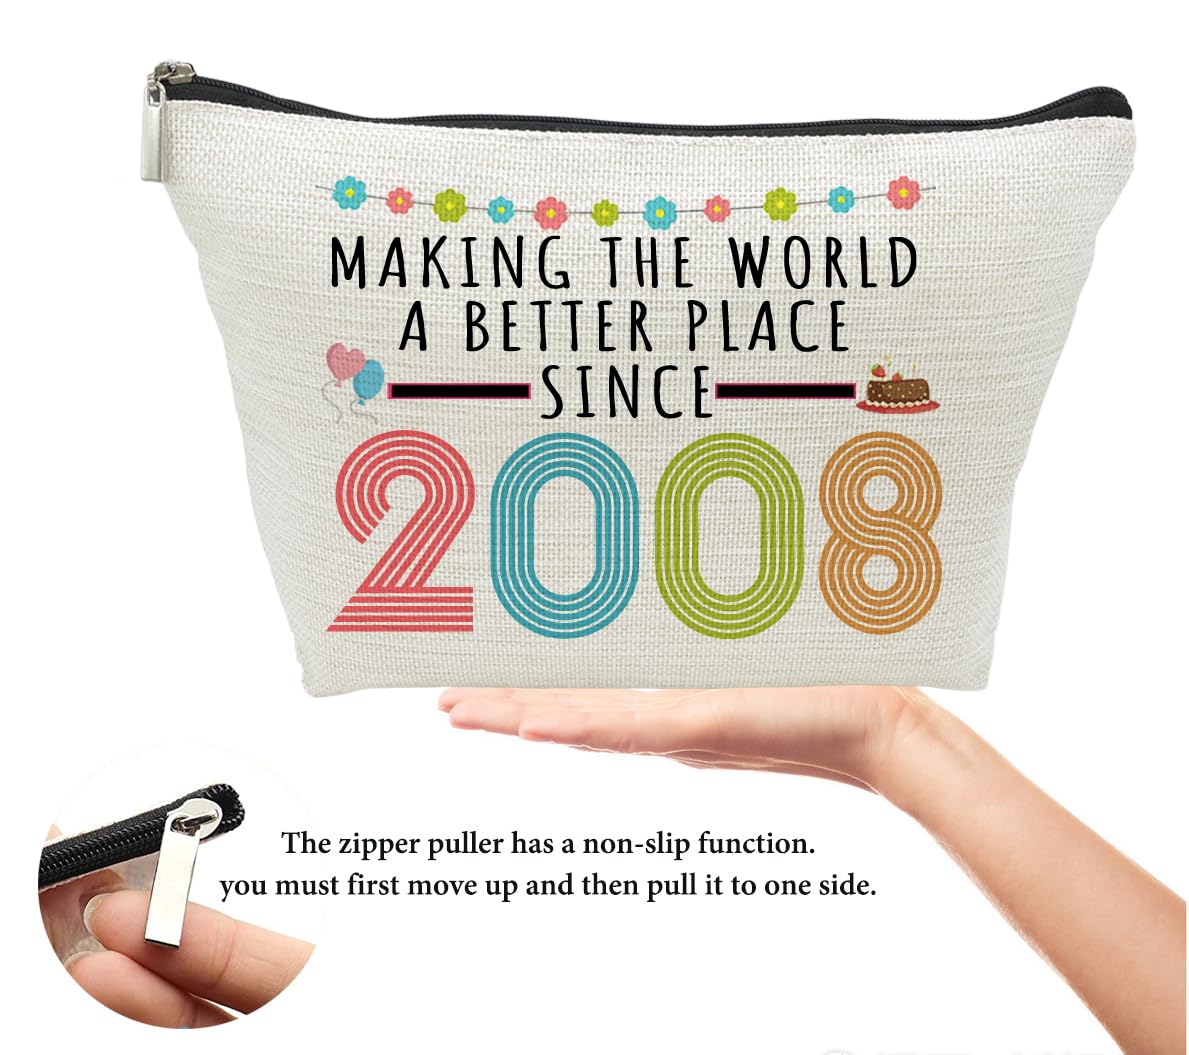 16th Birthday Gifts for Girls, Funny 16 Year Old Gift Makeup Bag, 2008 16th Birthday Makeup Bags for Her, Teens, Sister, Daughter, Niece, Granddaughter, Making The World a Better Place Since 2008